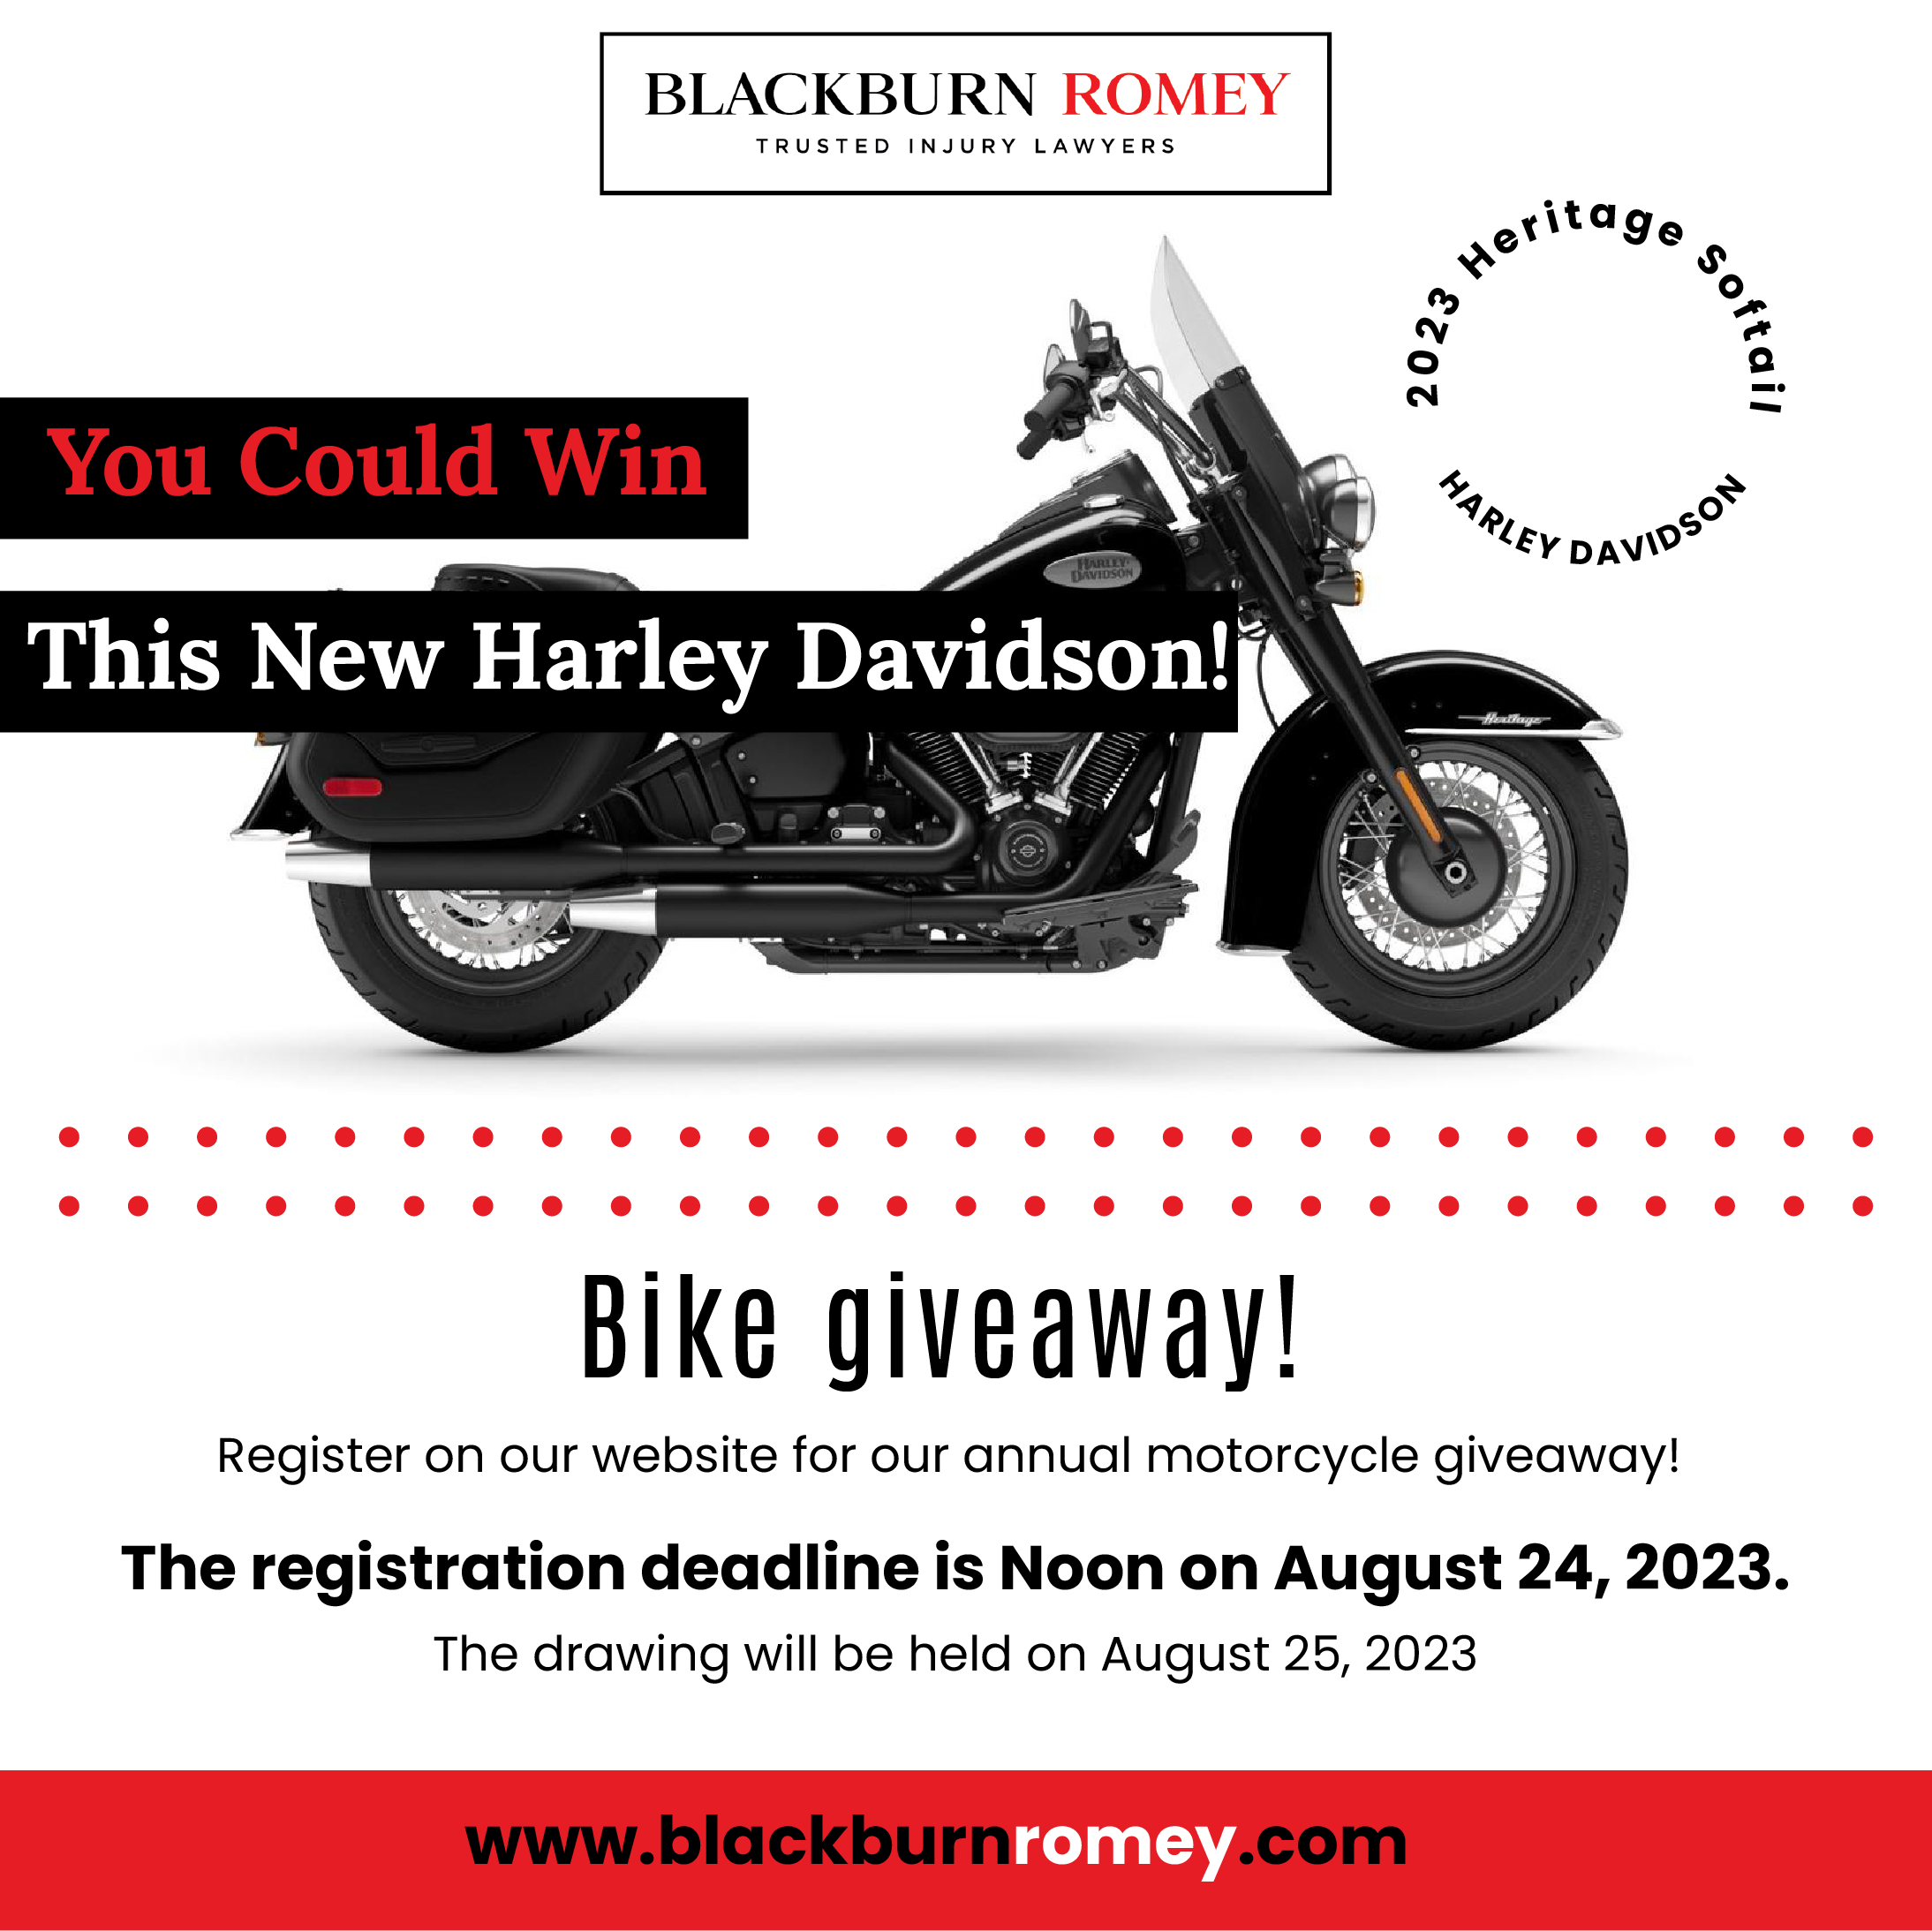 Rev Up Engines: Blackburn Romey Unveils Motorcycle Giveaway for 2023